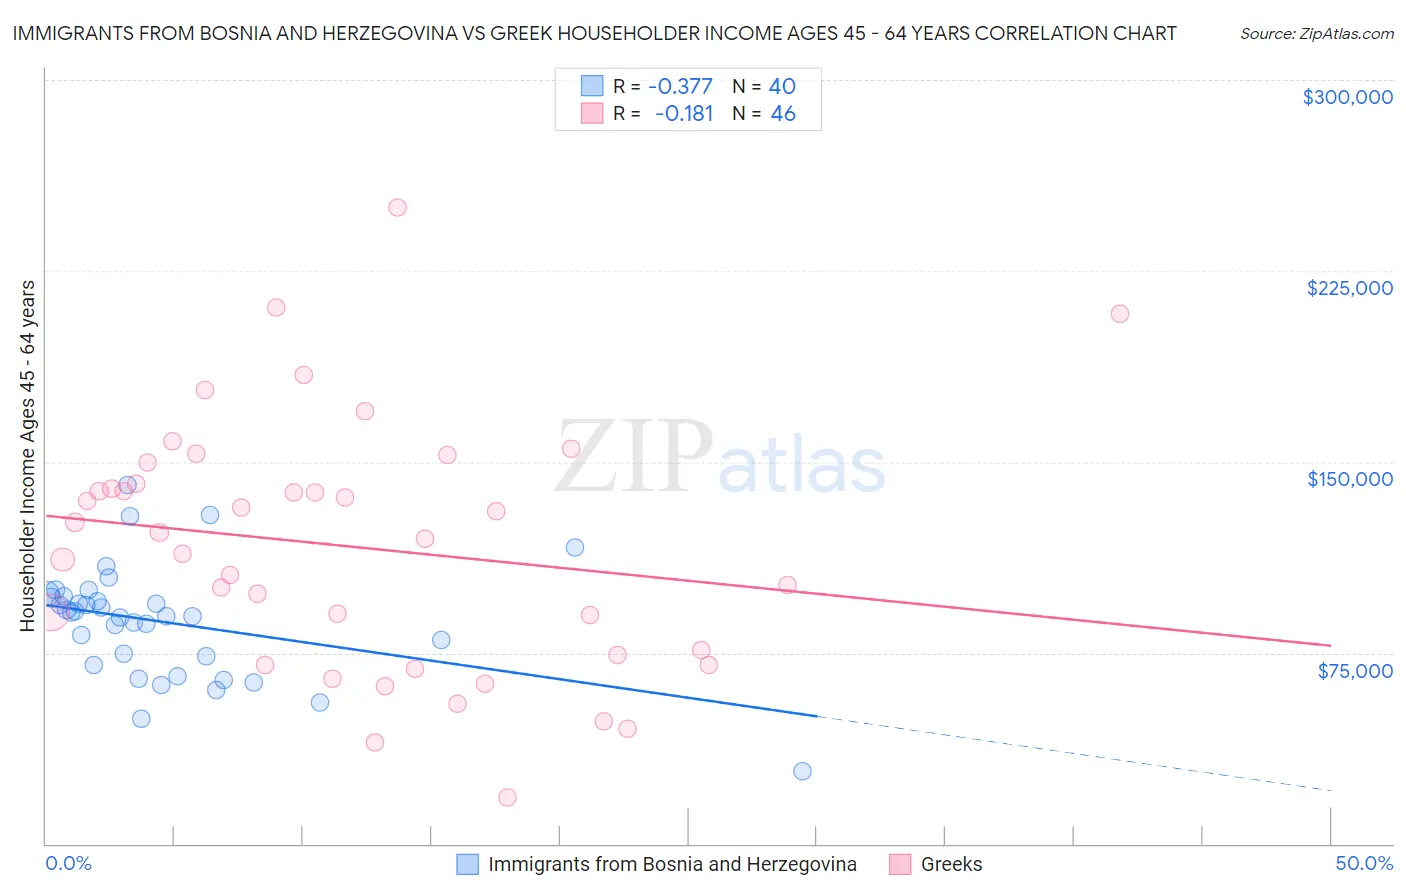 Immigrants from Bosnia and Herzegovina vs Greek Householder Income Ages 45 - 64 years